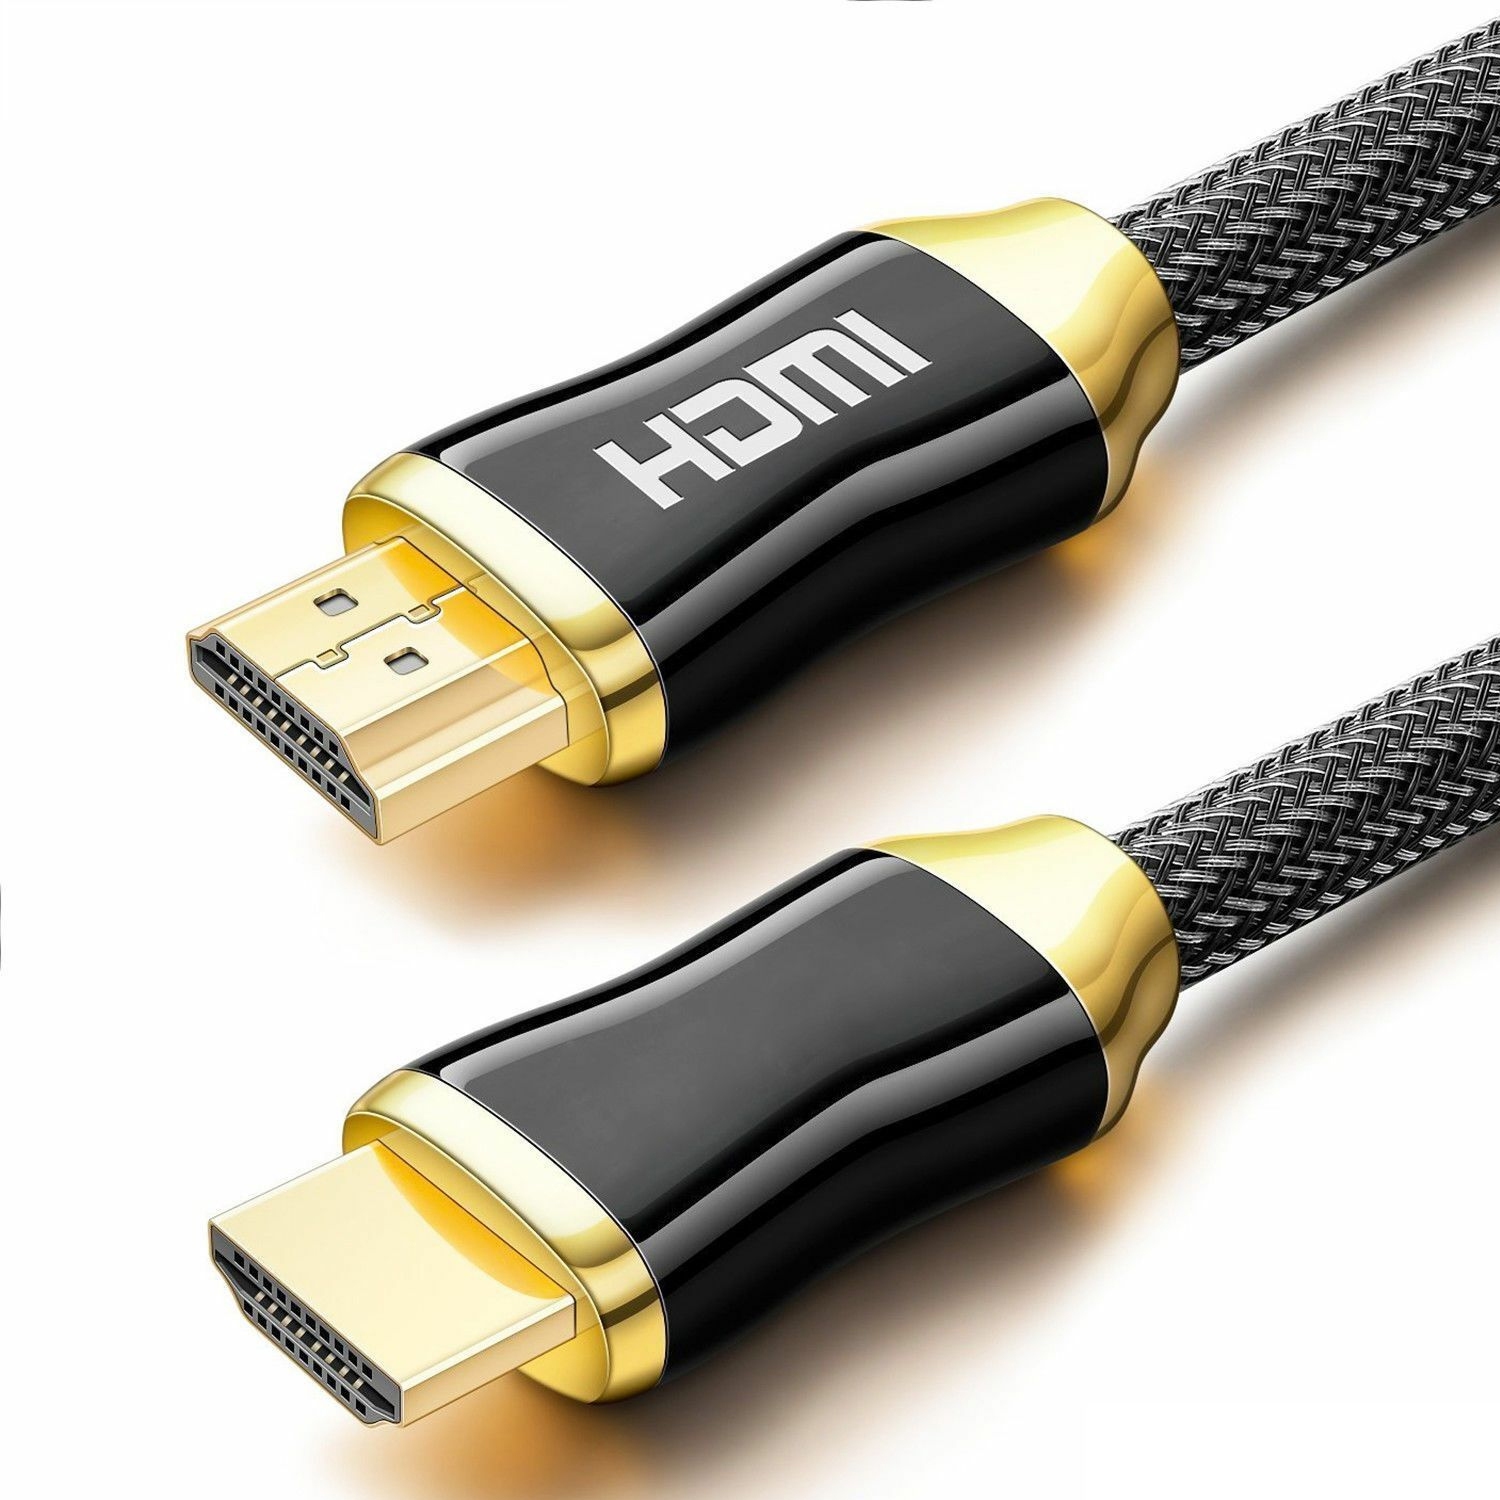 2.1 HDMI Cable 3 meter (10 Feet) 8K Ultra HD High-Speed GBPS lead | Supports 8K@60Hz, 4K@120Hz, 4320P, 3D Video Display, Braided Cord for Samsung LG Sony TCL PS5 PS4 TV Box